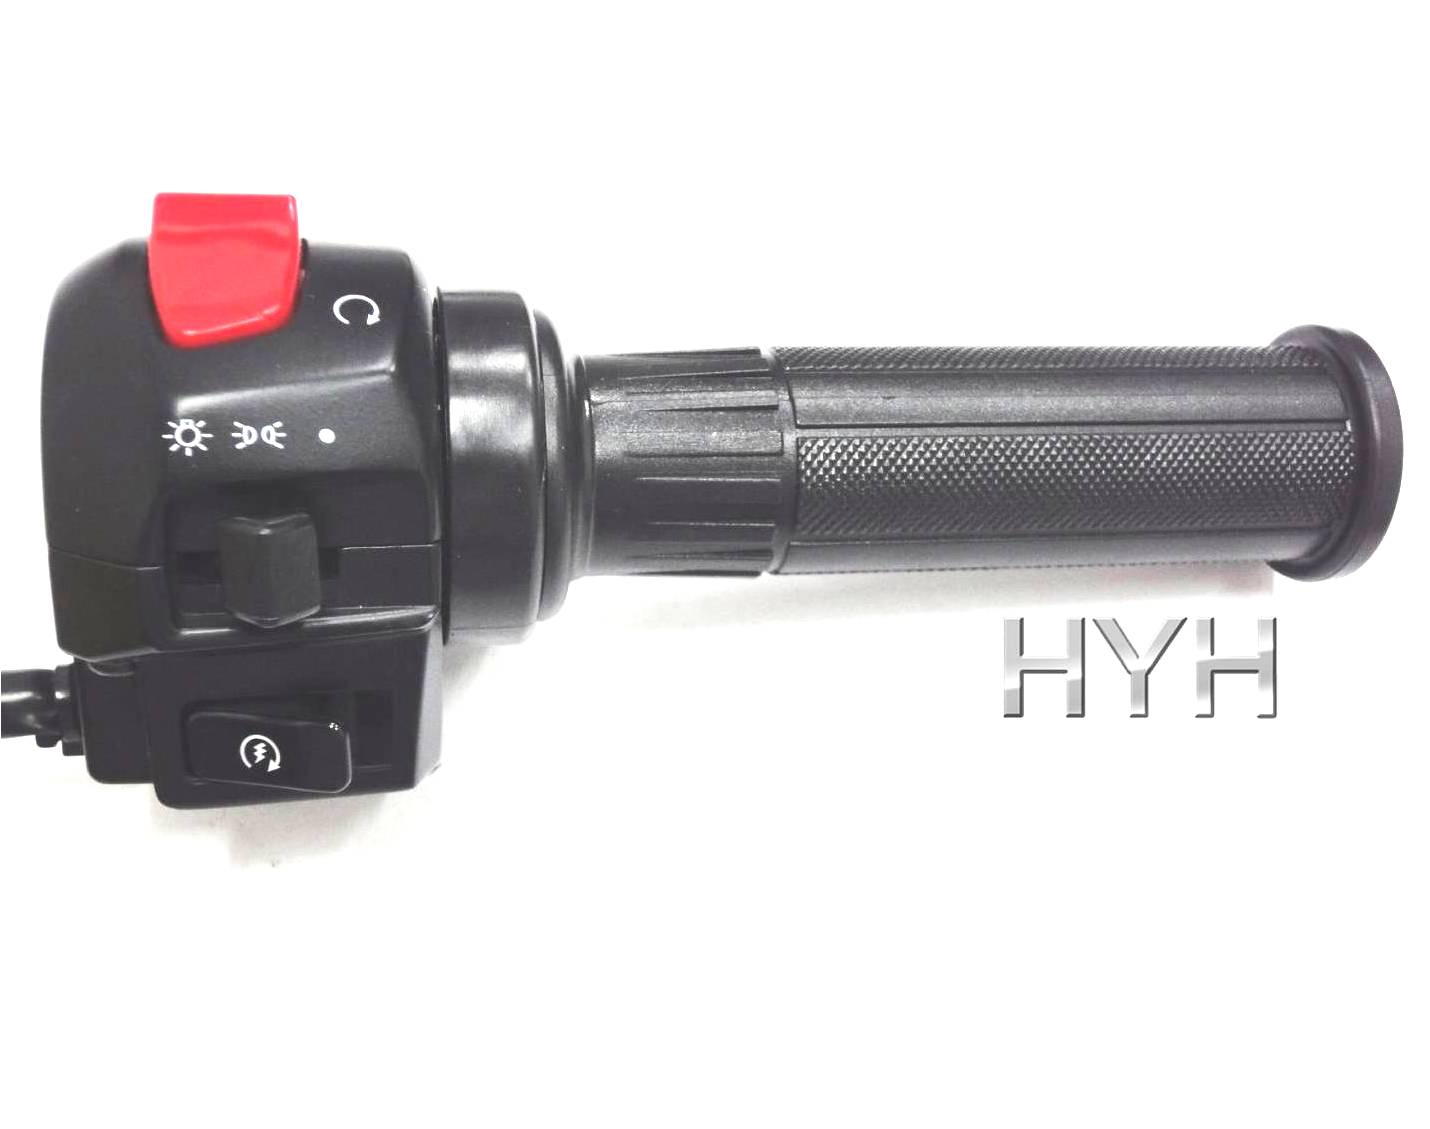 handle switch (including accelerator by two hall effect sensor)